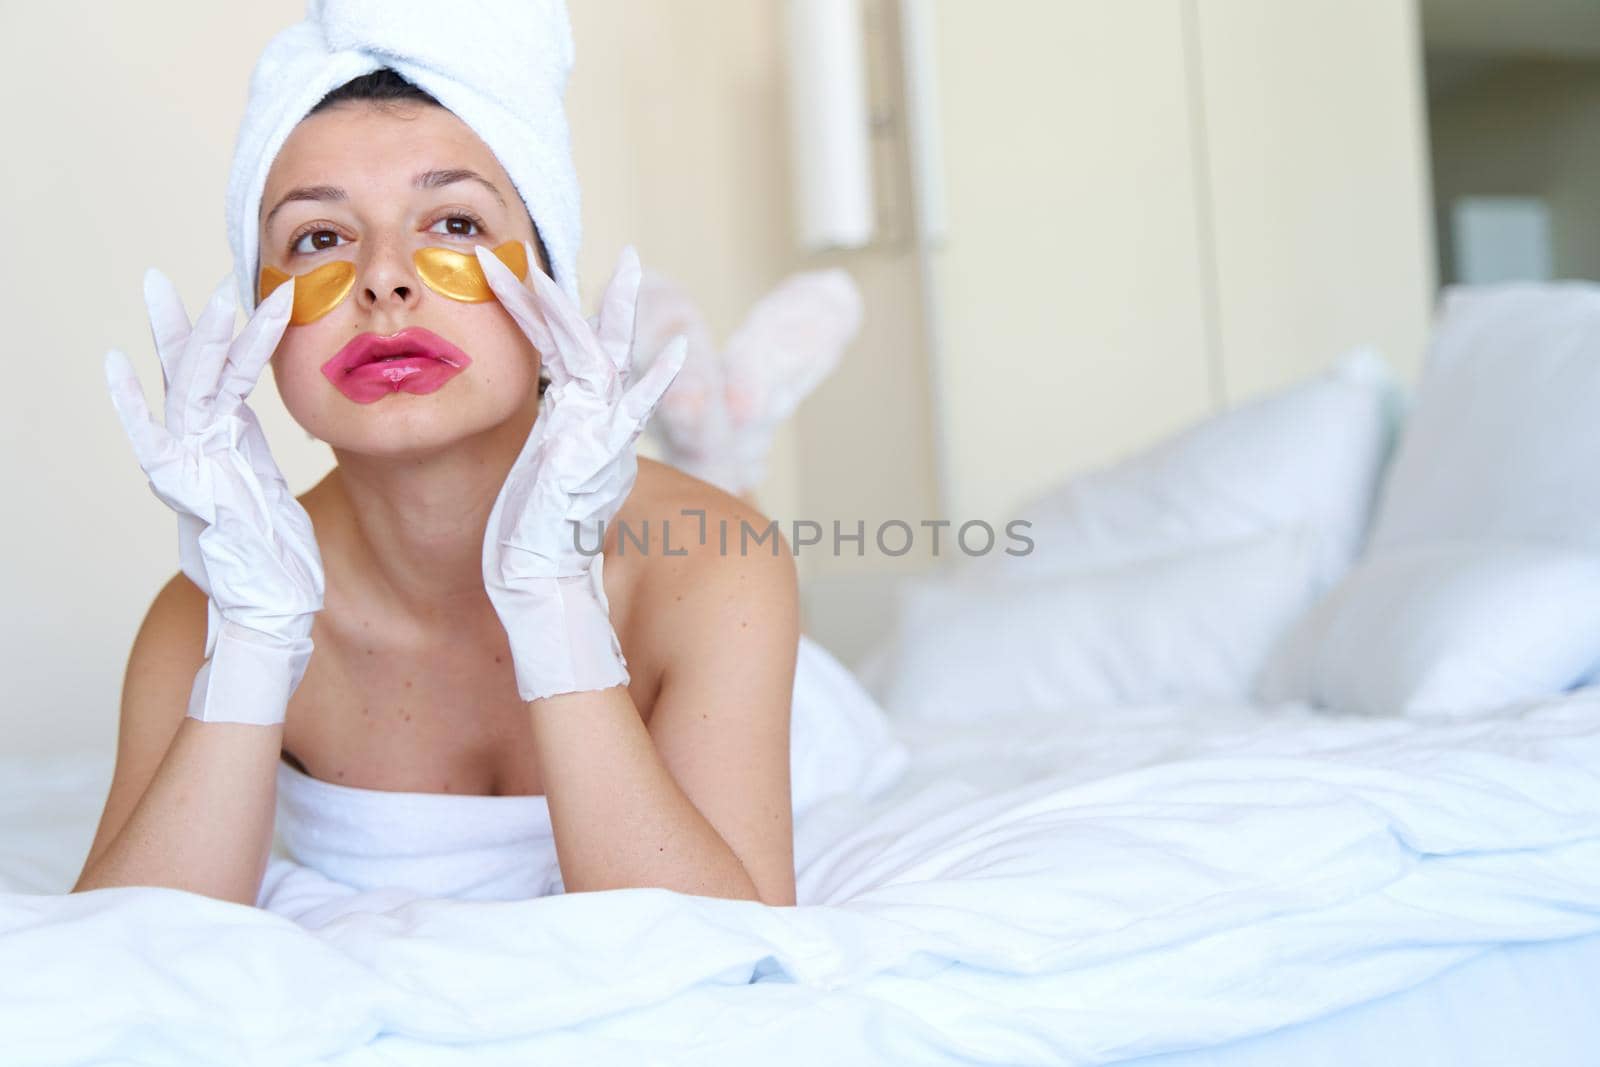 After a shower, a girl wrapped in a towel uses cosmetic patches for the skin under the eyes, lips and gloves to moisturize her hands and feet. Cosmetic trends for body care at home by Try_my_best